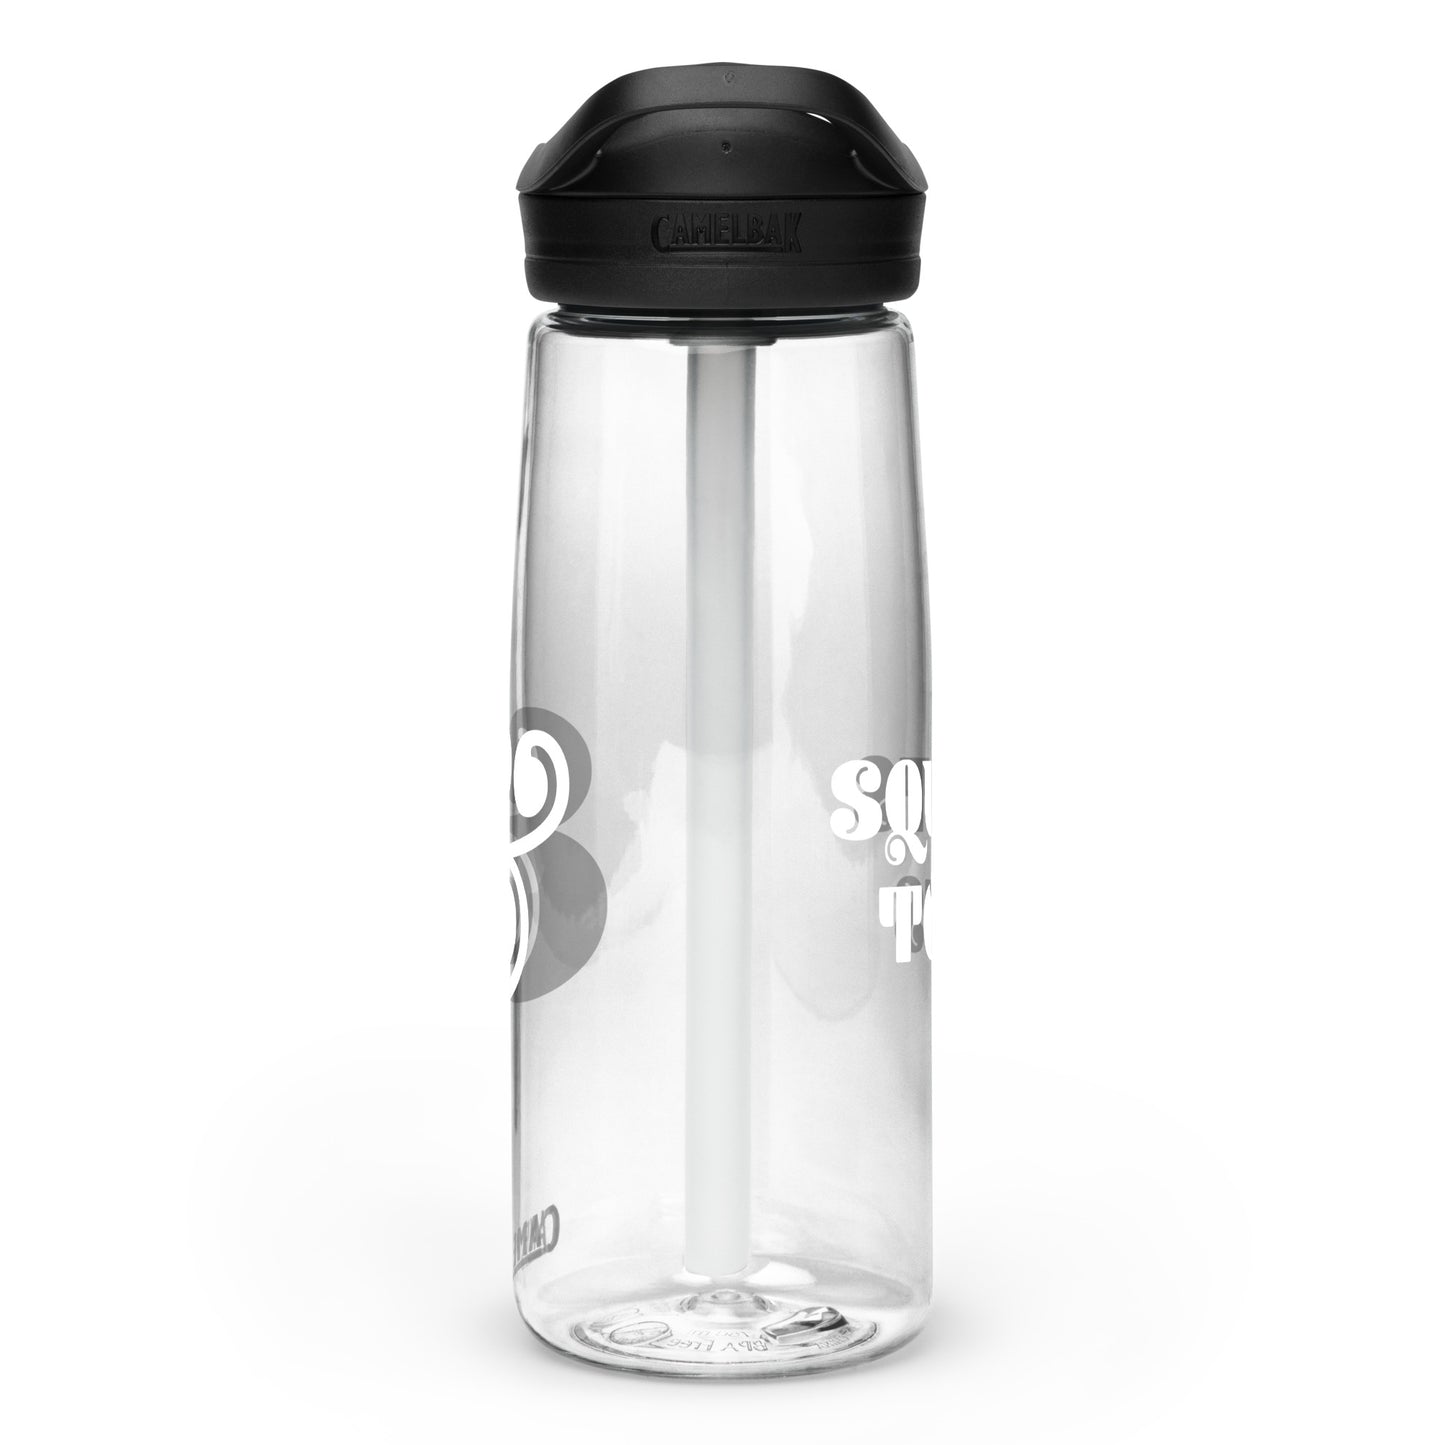 Squats and Tots Sports water bottle